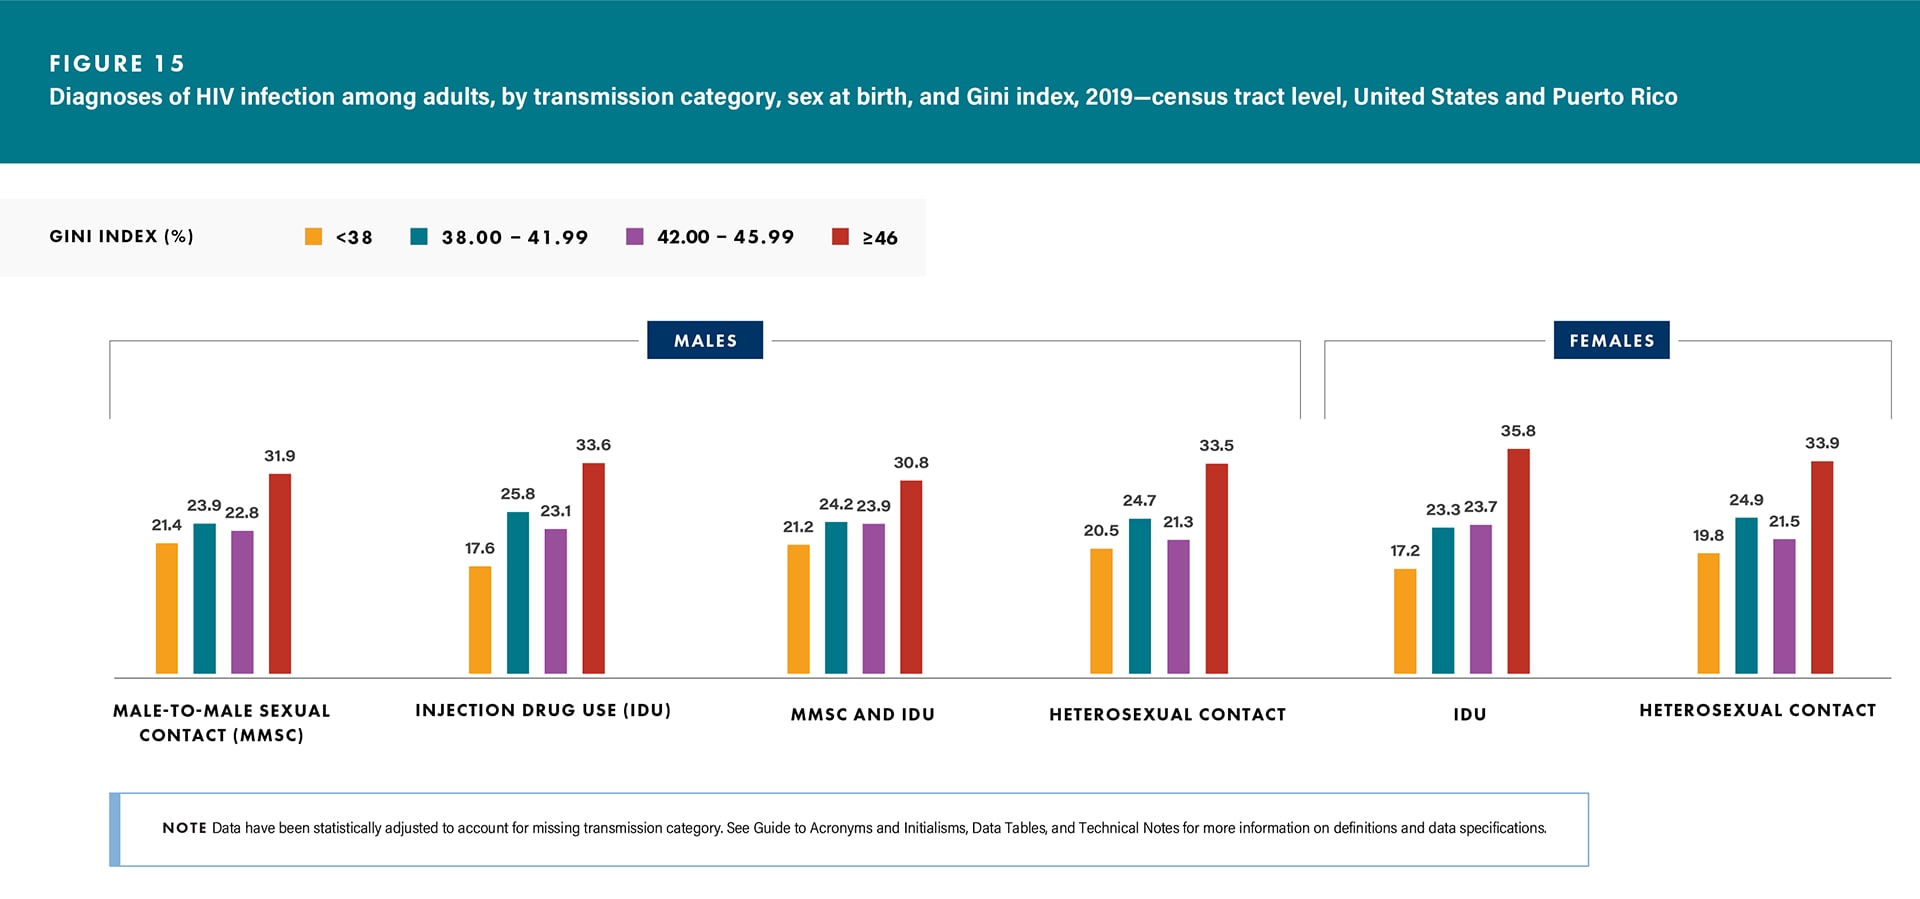 In 2019, adults who lived in census tracts with the highest income inequality (where income inequality was 46 percent or more) accounted for the highest HIV diagnosis rates for all transmission categories for both sexes.